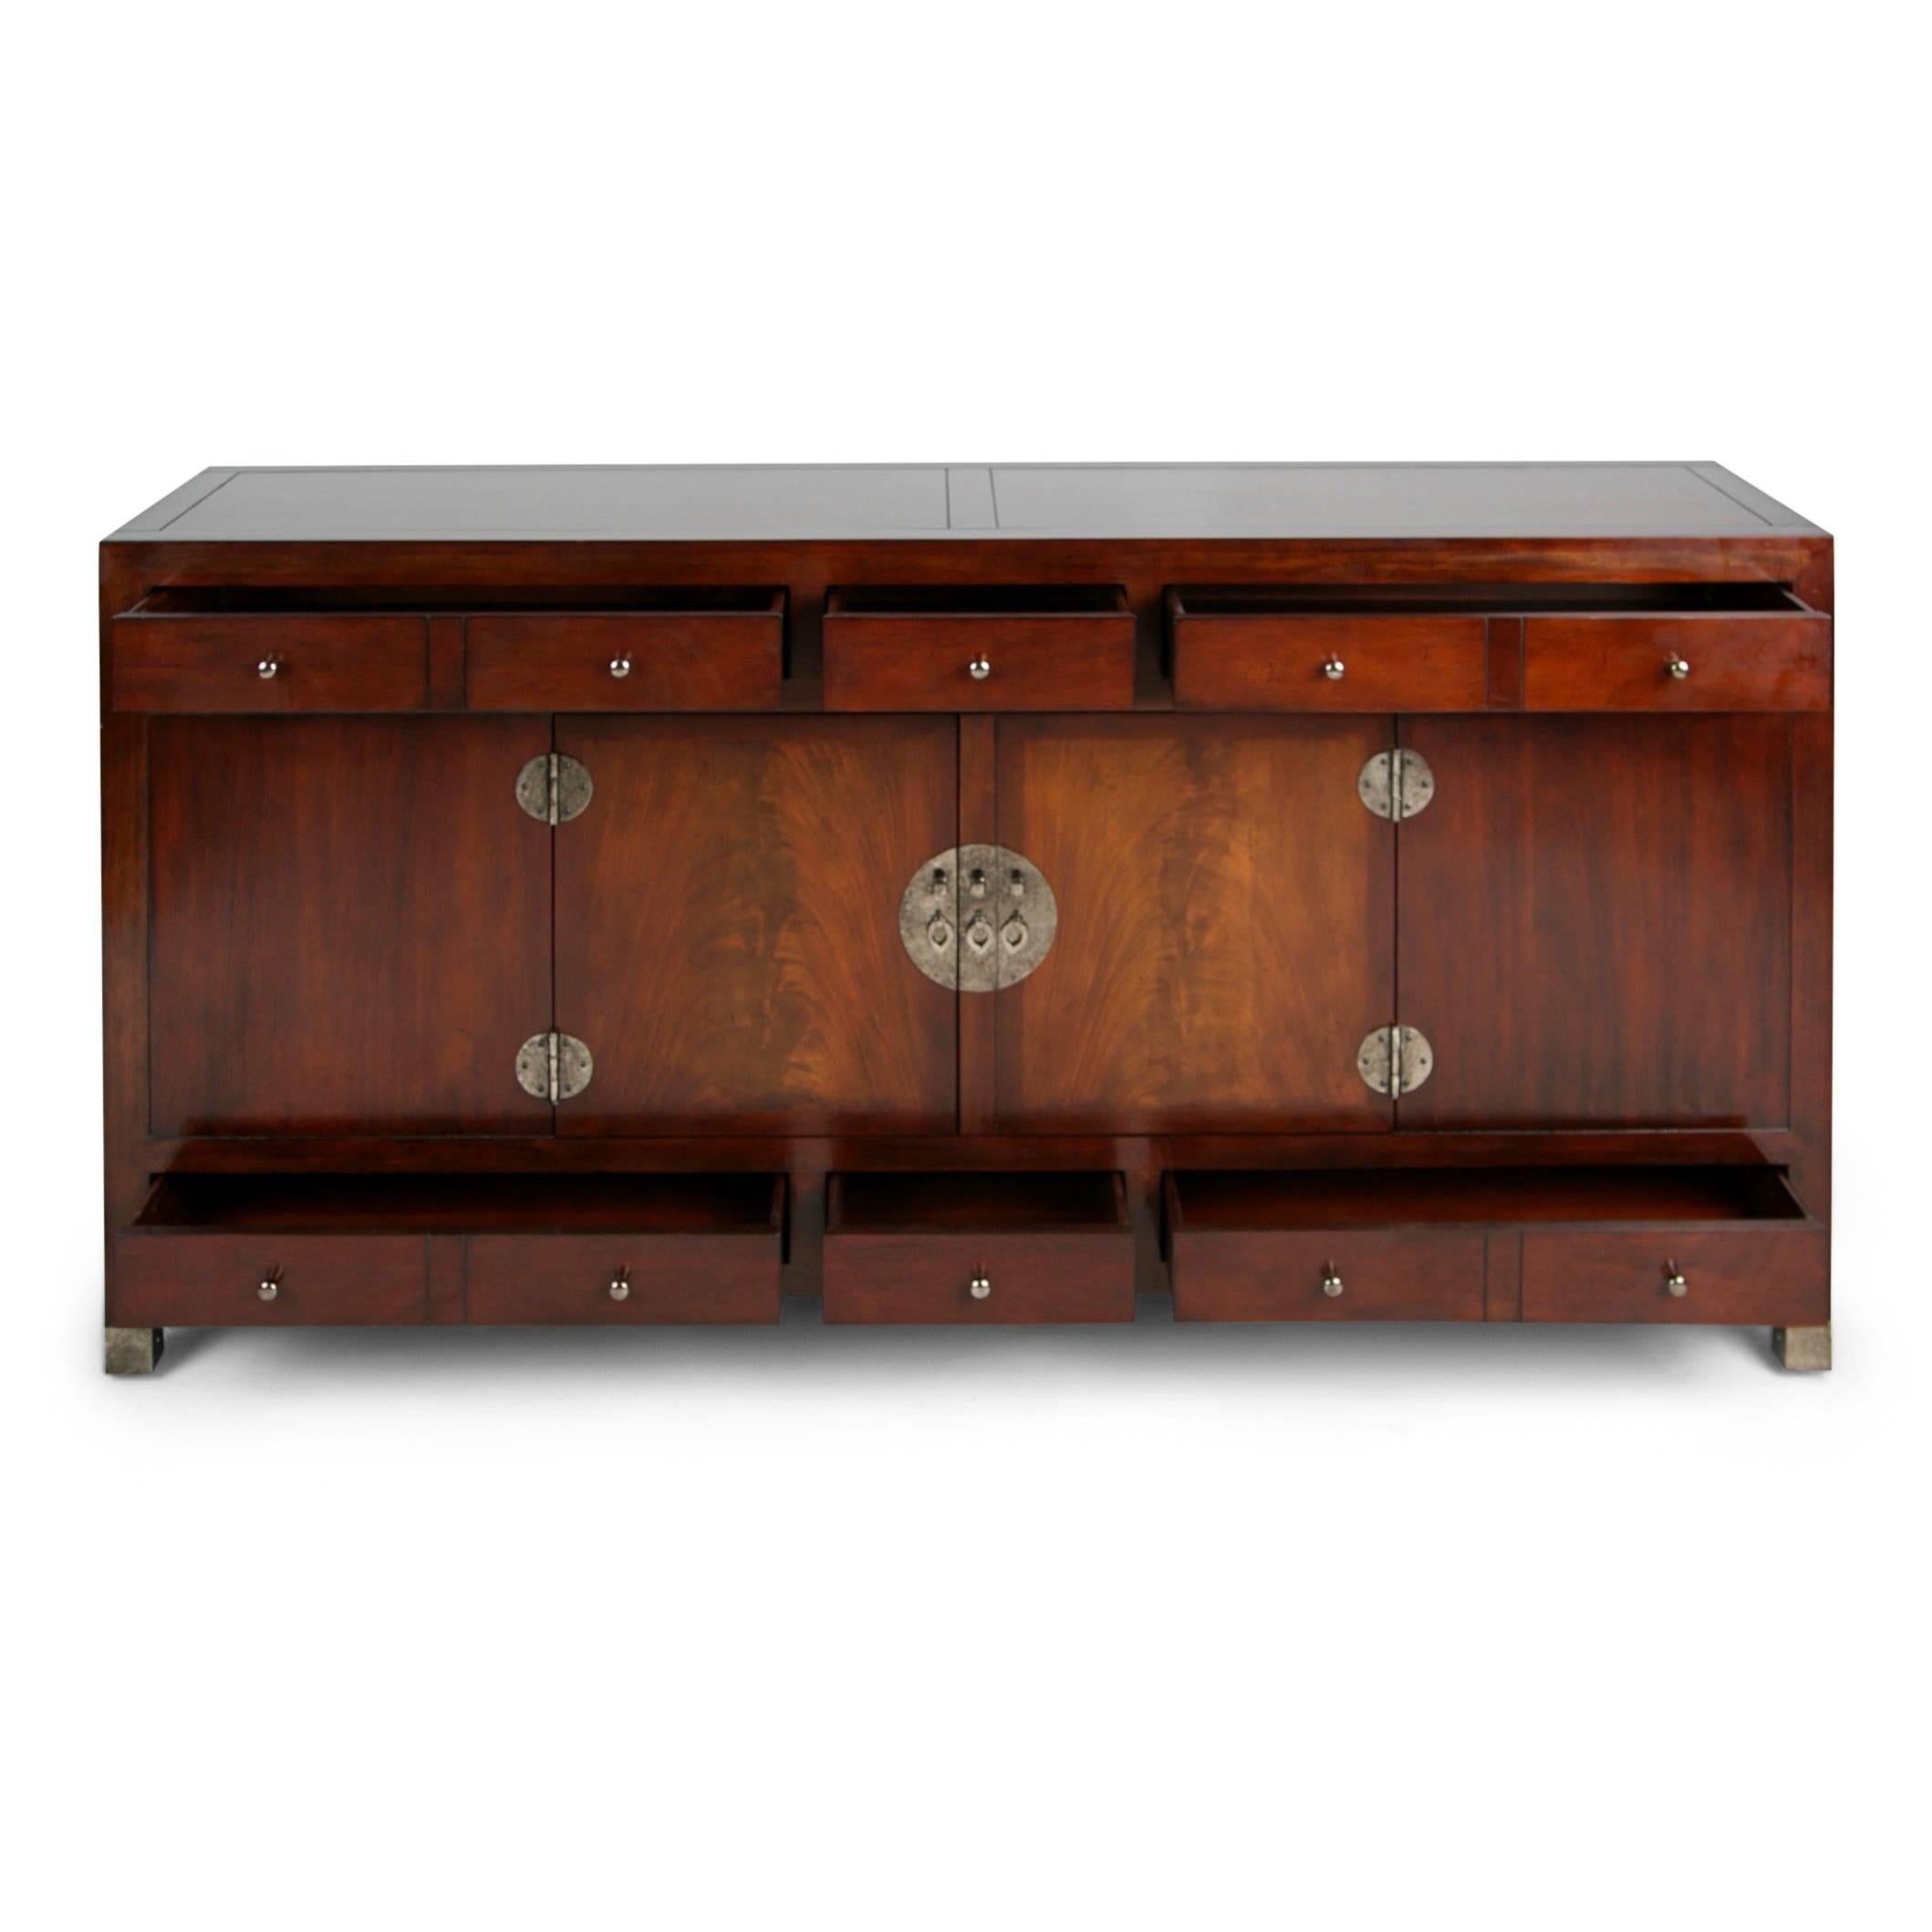 Extremely well crafted and impressive Ming style signed server by Baker. Fabricated from heavy mahogany and punctuated by metal hardware this expansive sideboard comprises of ten fitted drawers at the front with two doors. Both sides have hidden